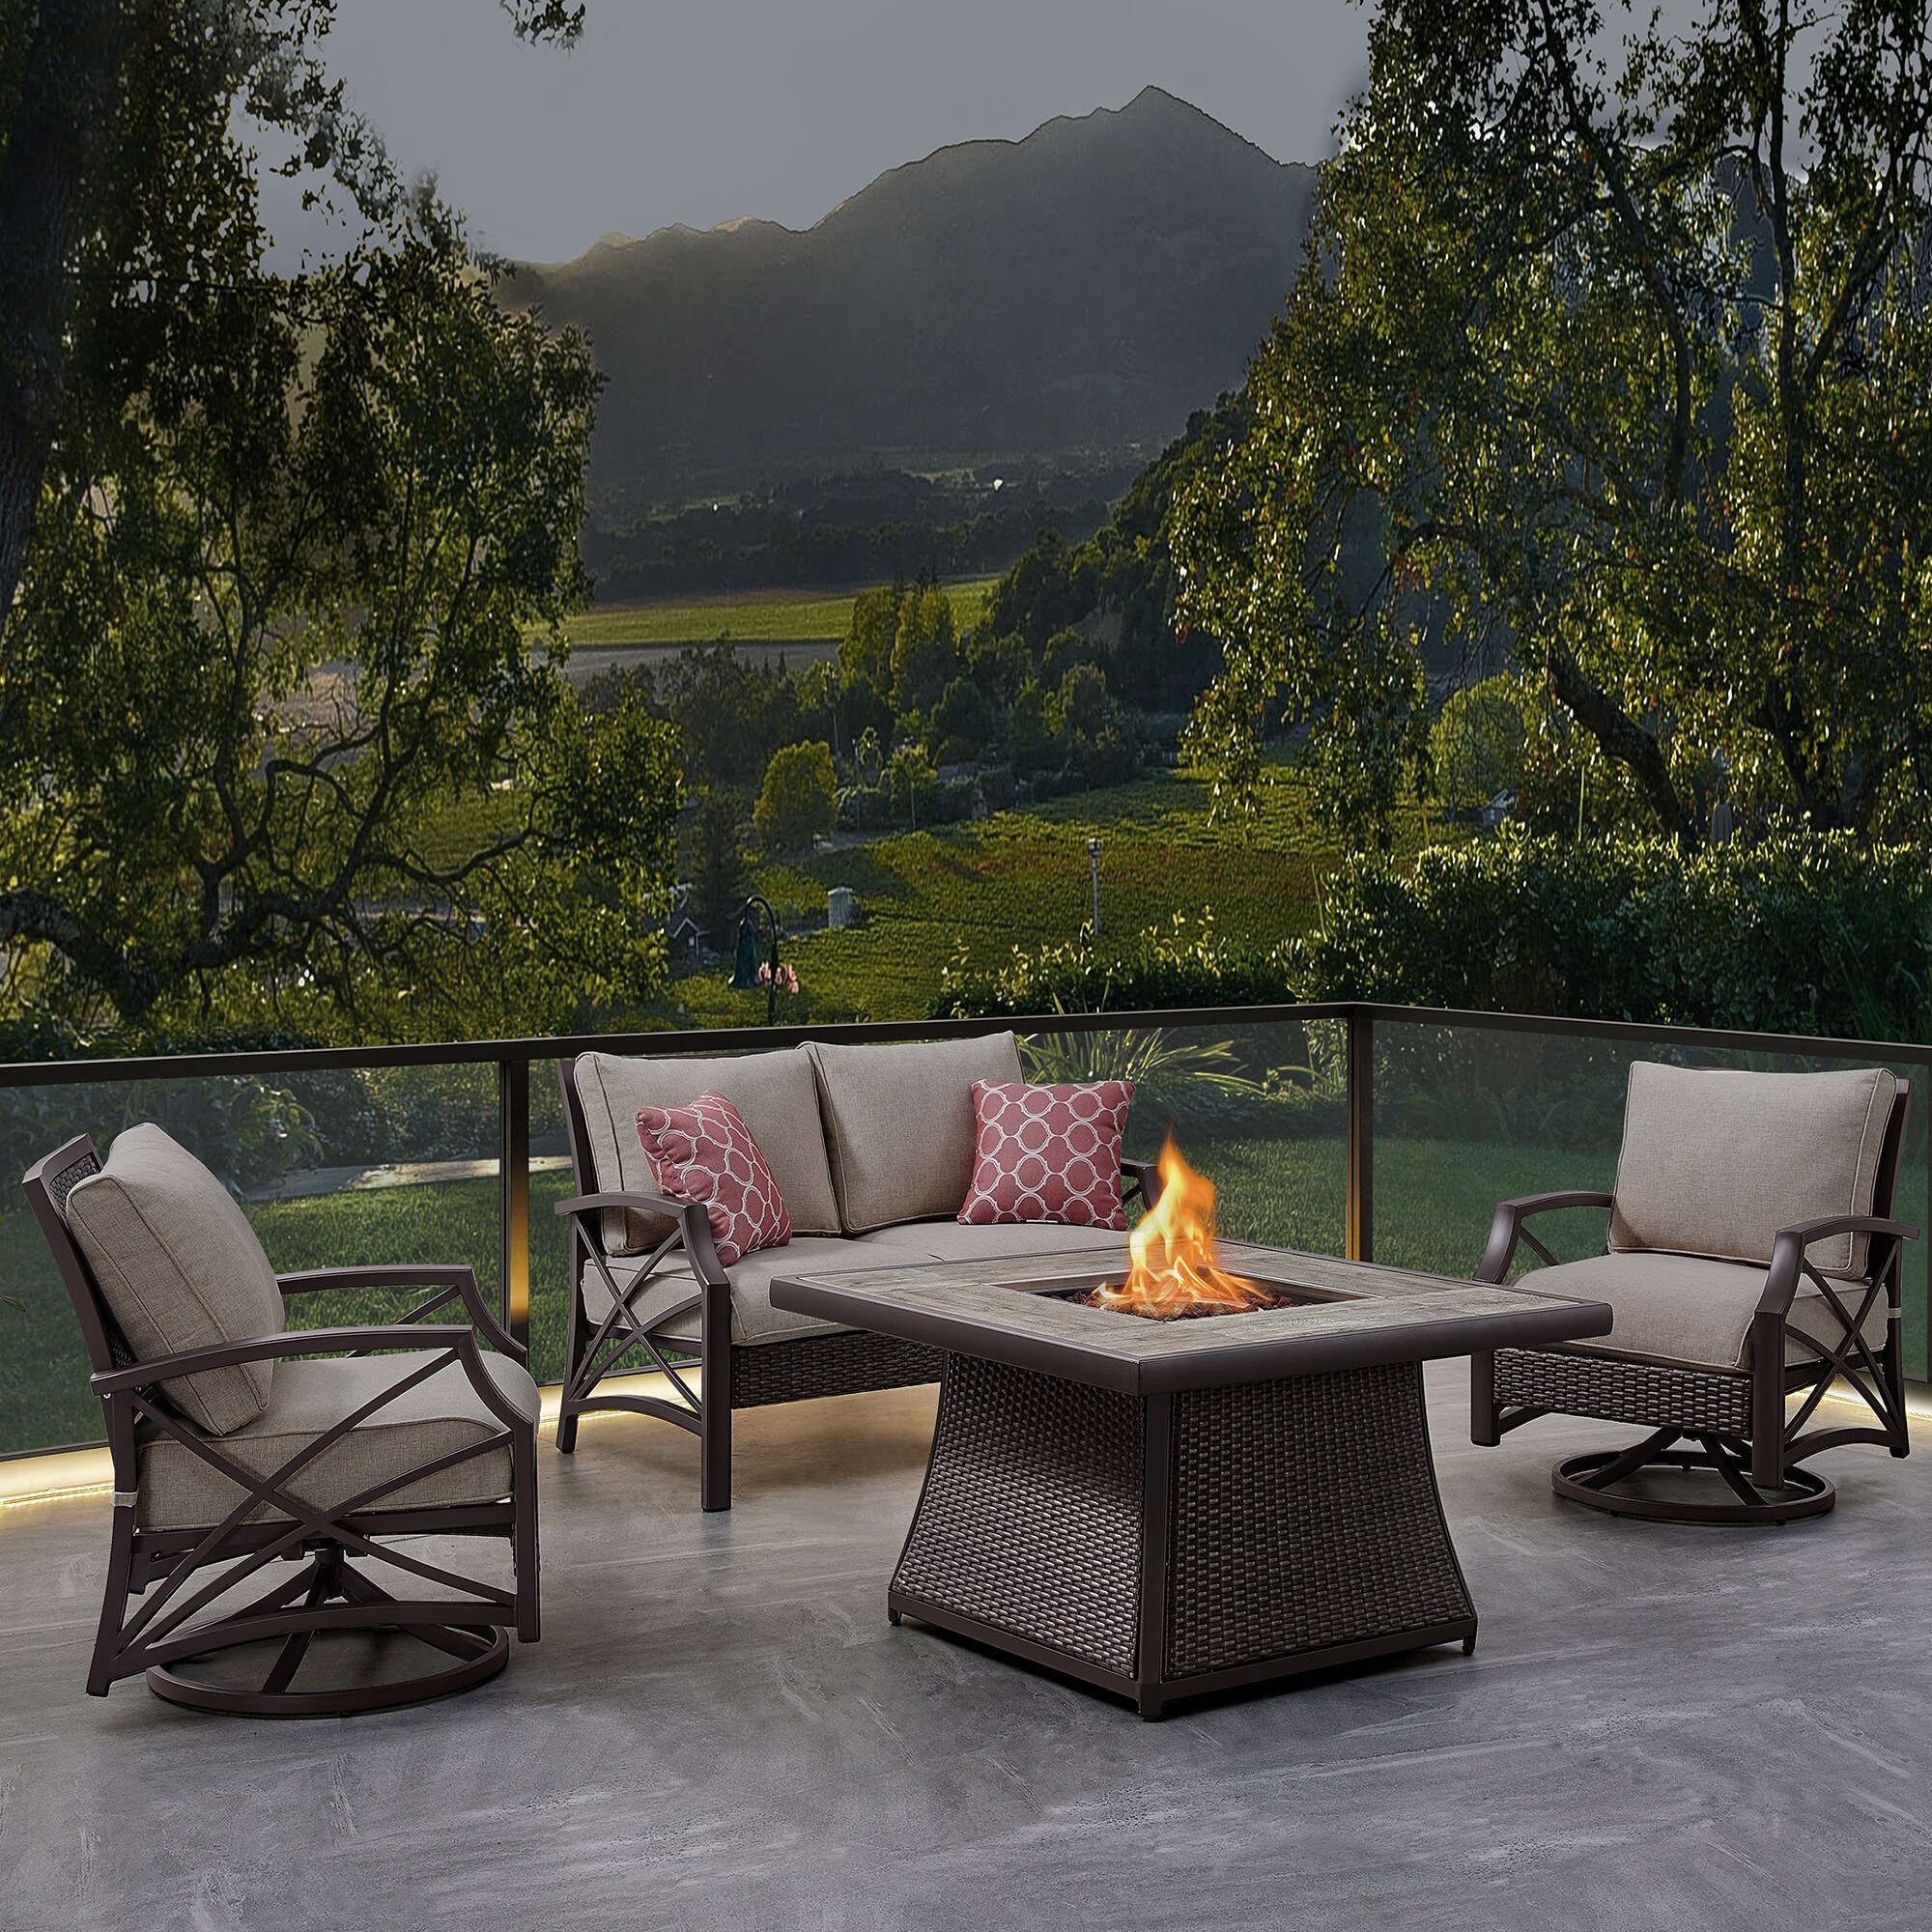 Patio furniture with fire pit. summer outdoor decor trends